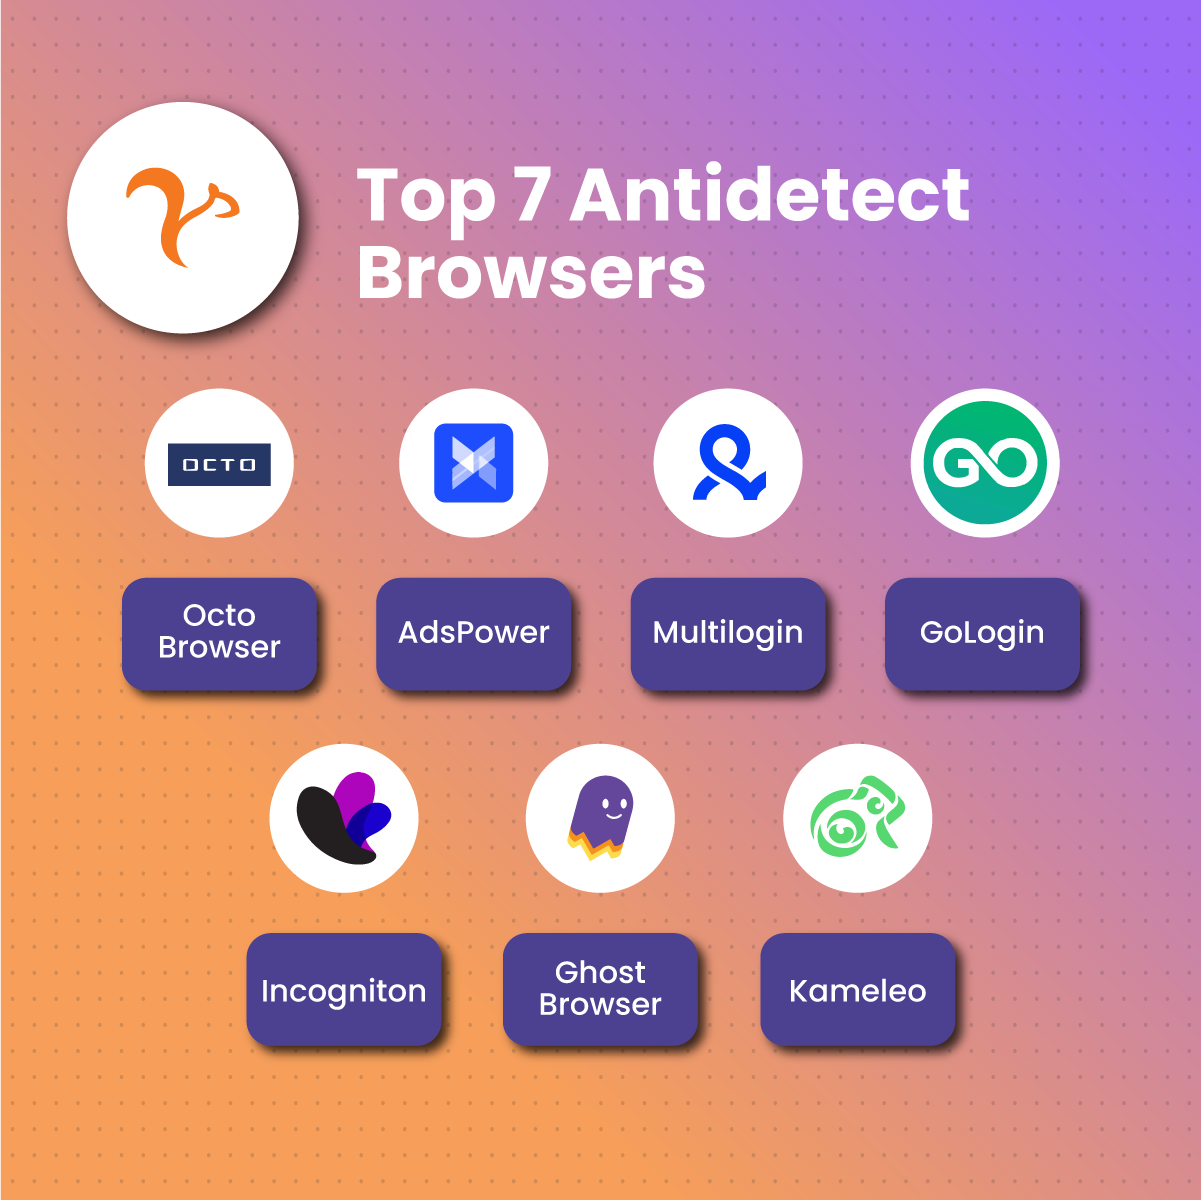 Top 7 Antidetect Browsers